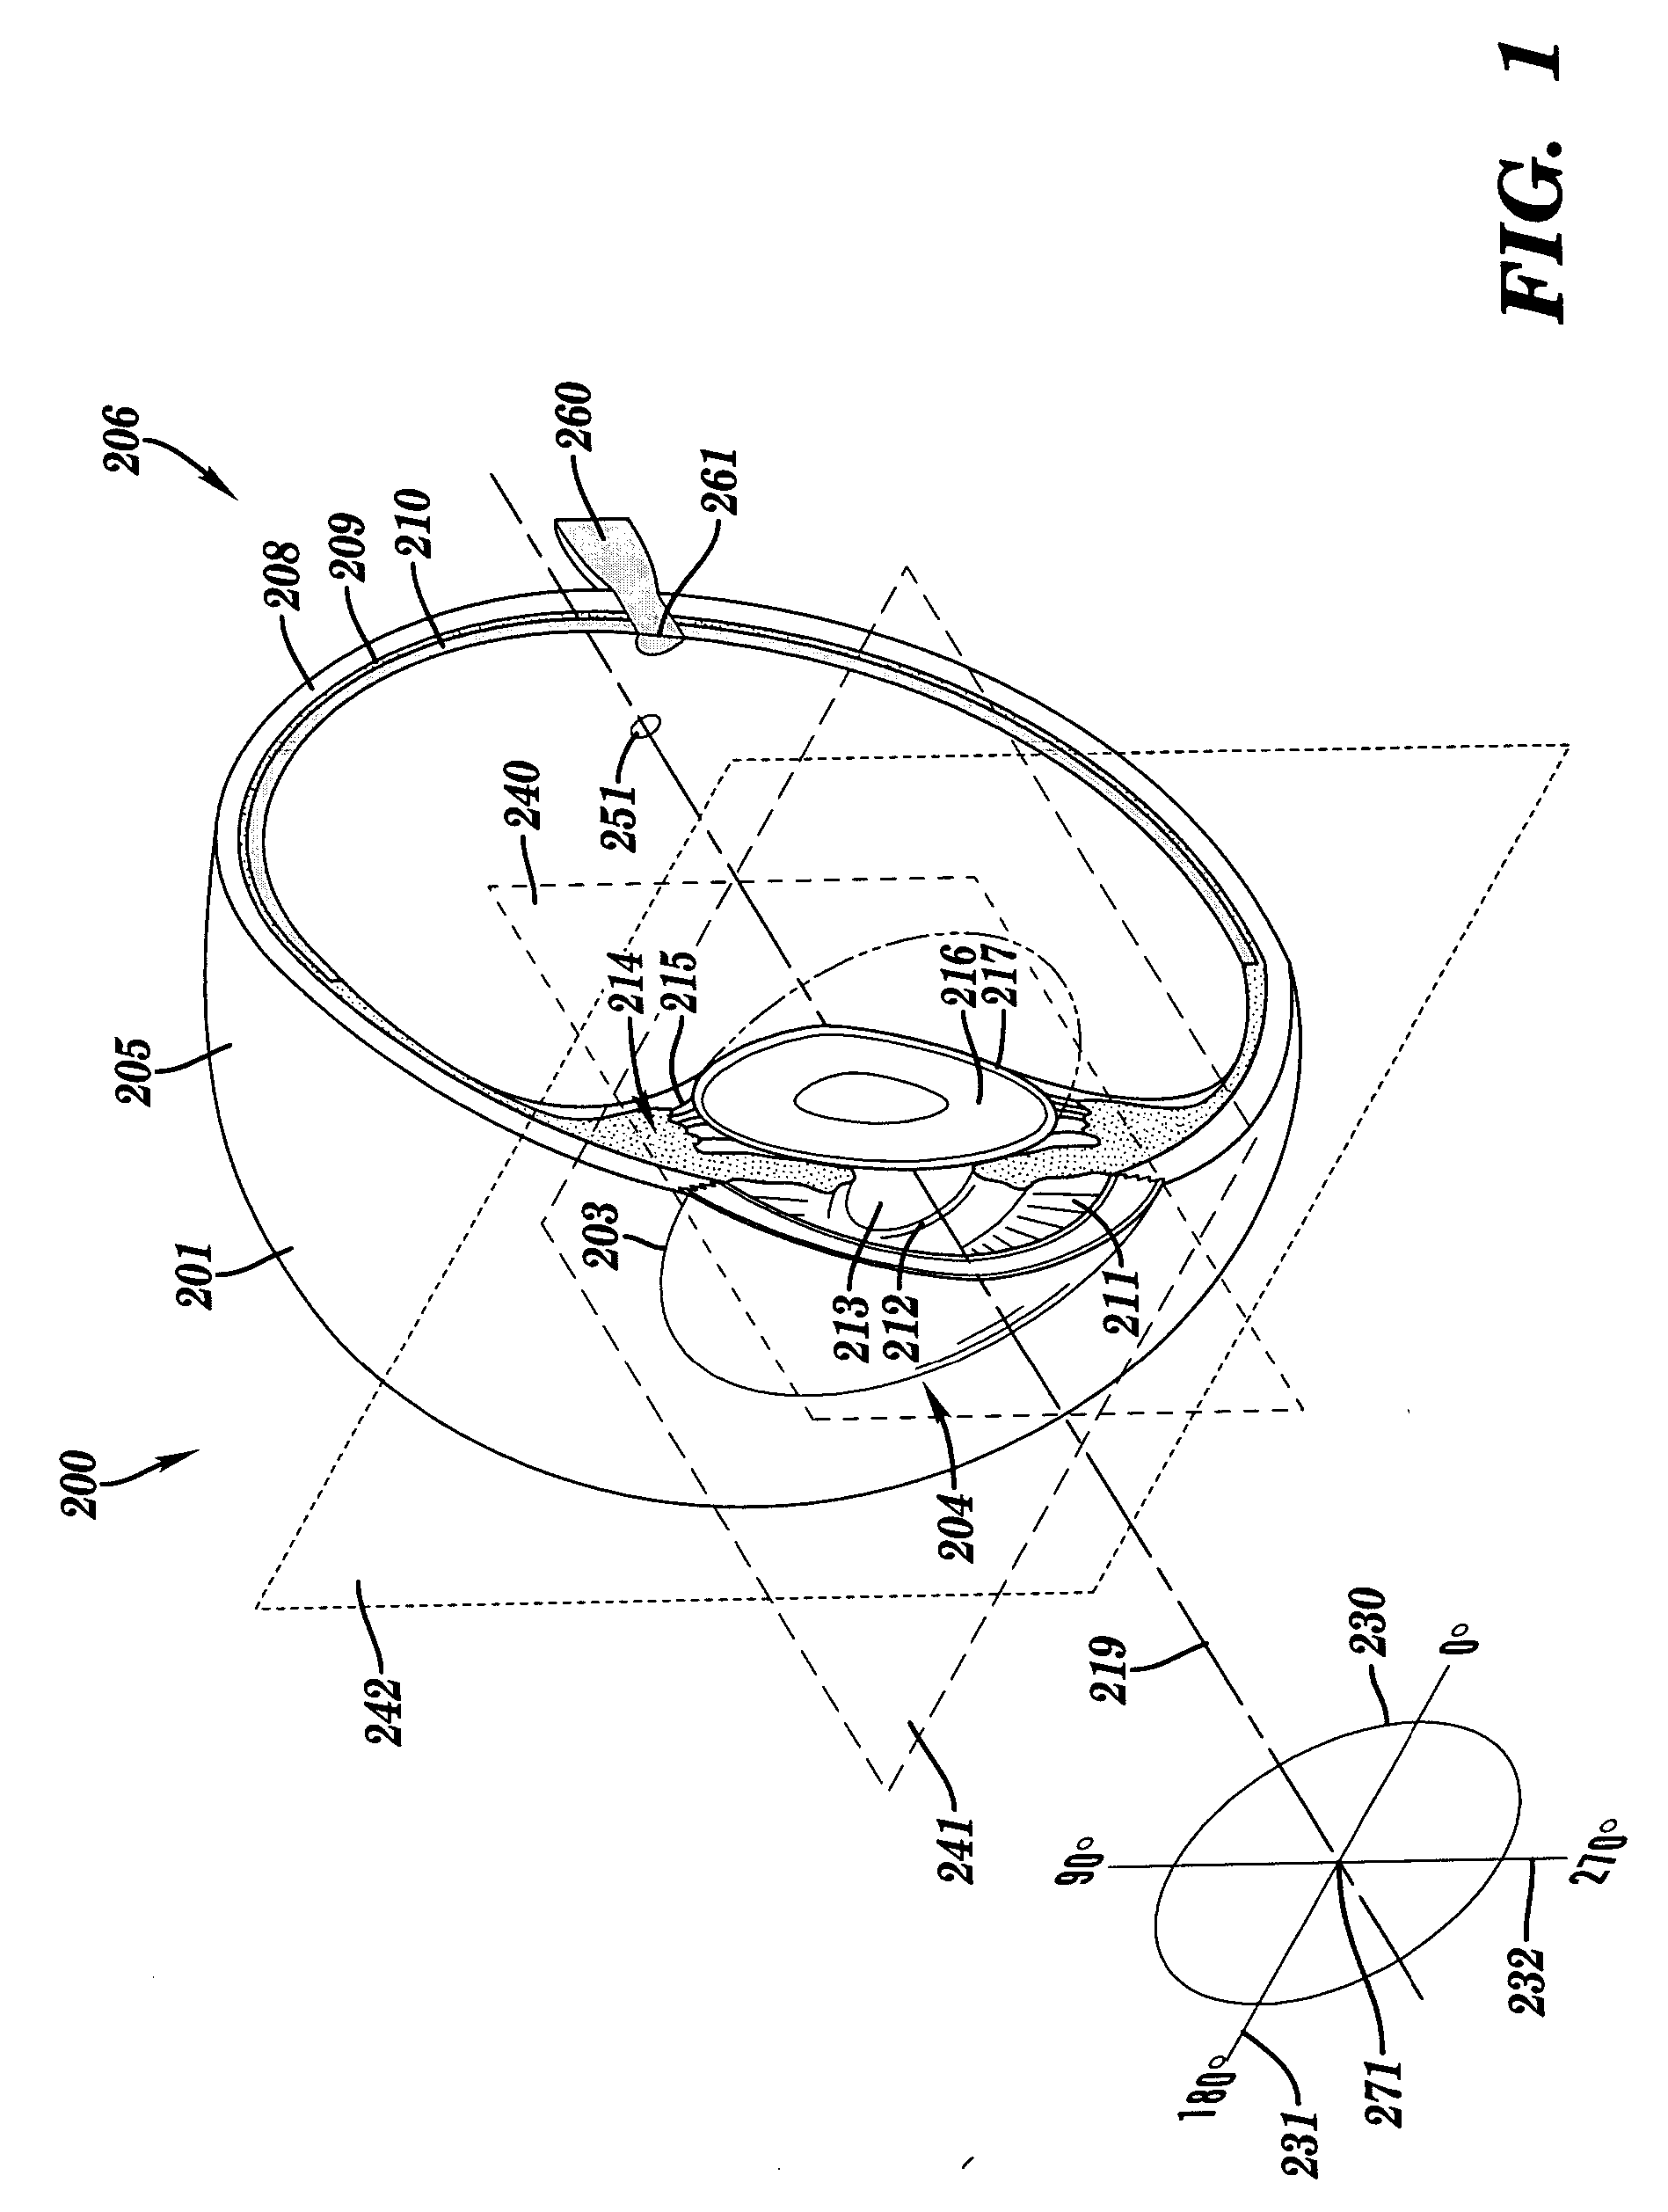 Apparatus and method for assessing retinal damage